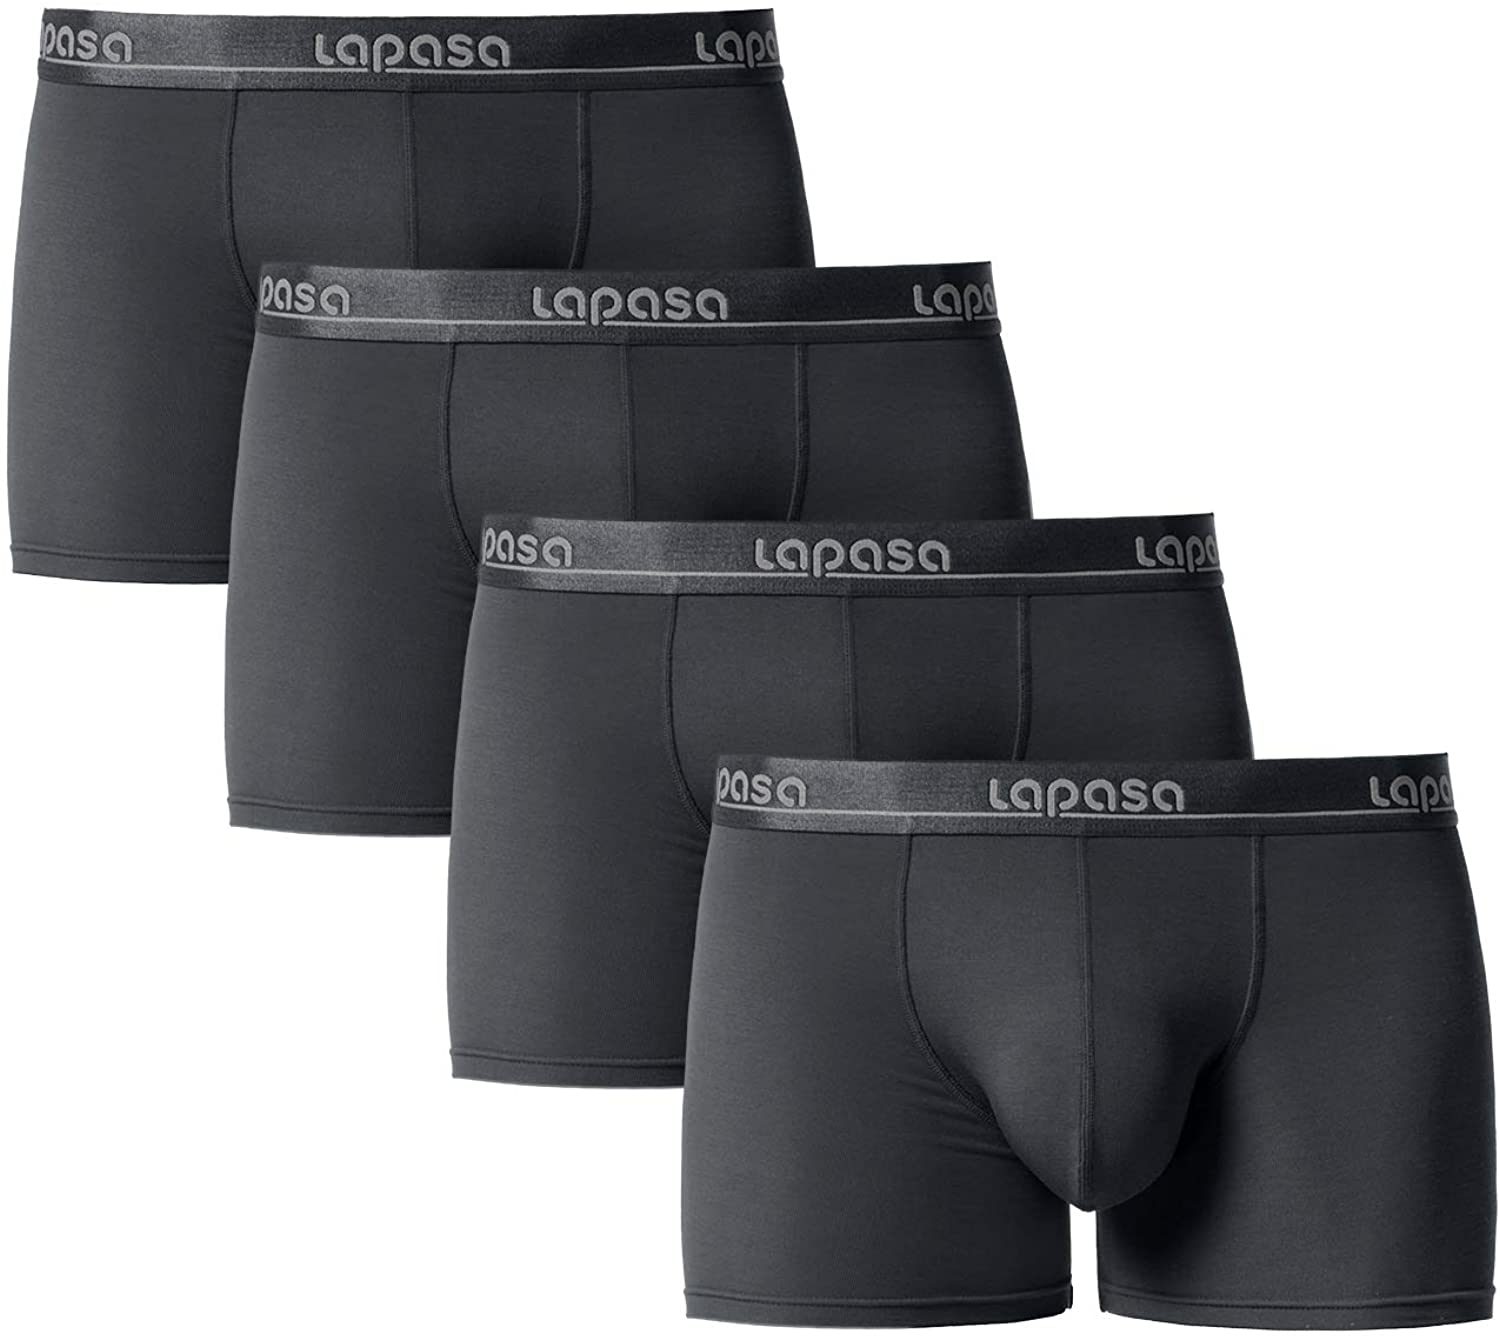 LAPASA Mens 4 Pack Cotton Briefs Counter Pouch Easy Removable Tag Underwear Wide Waistband M04 